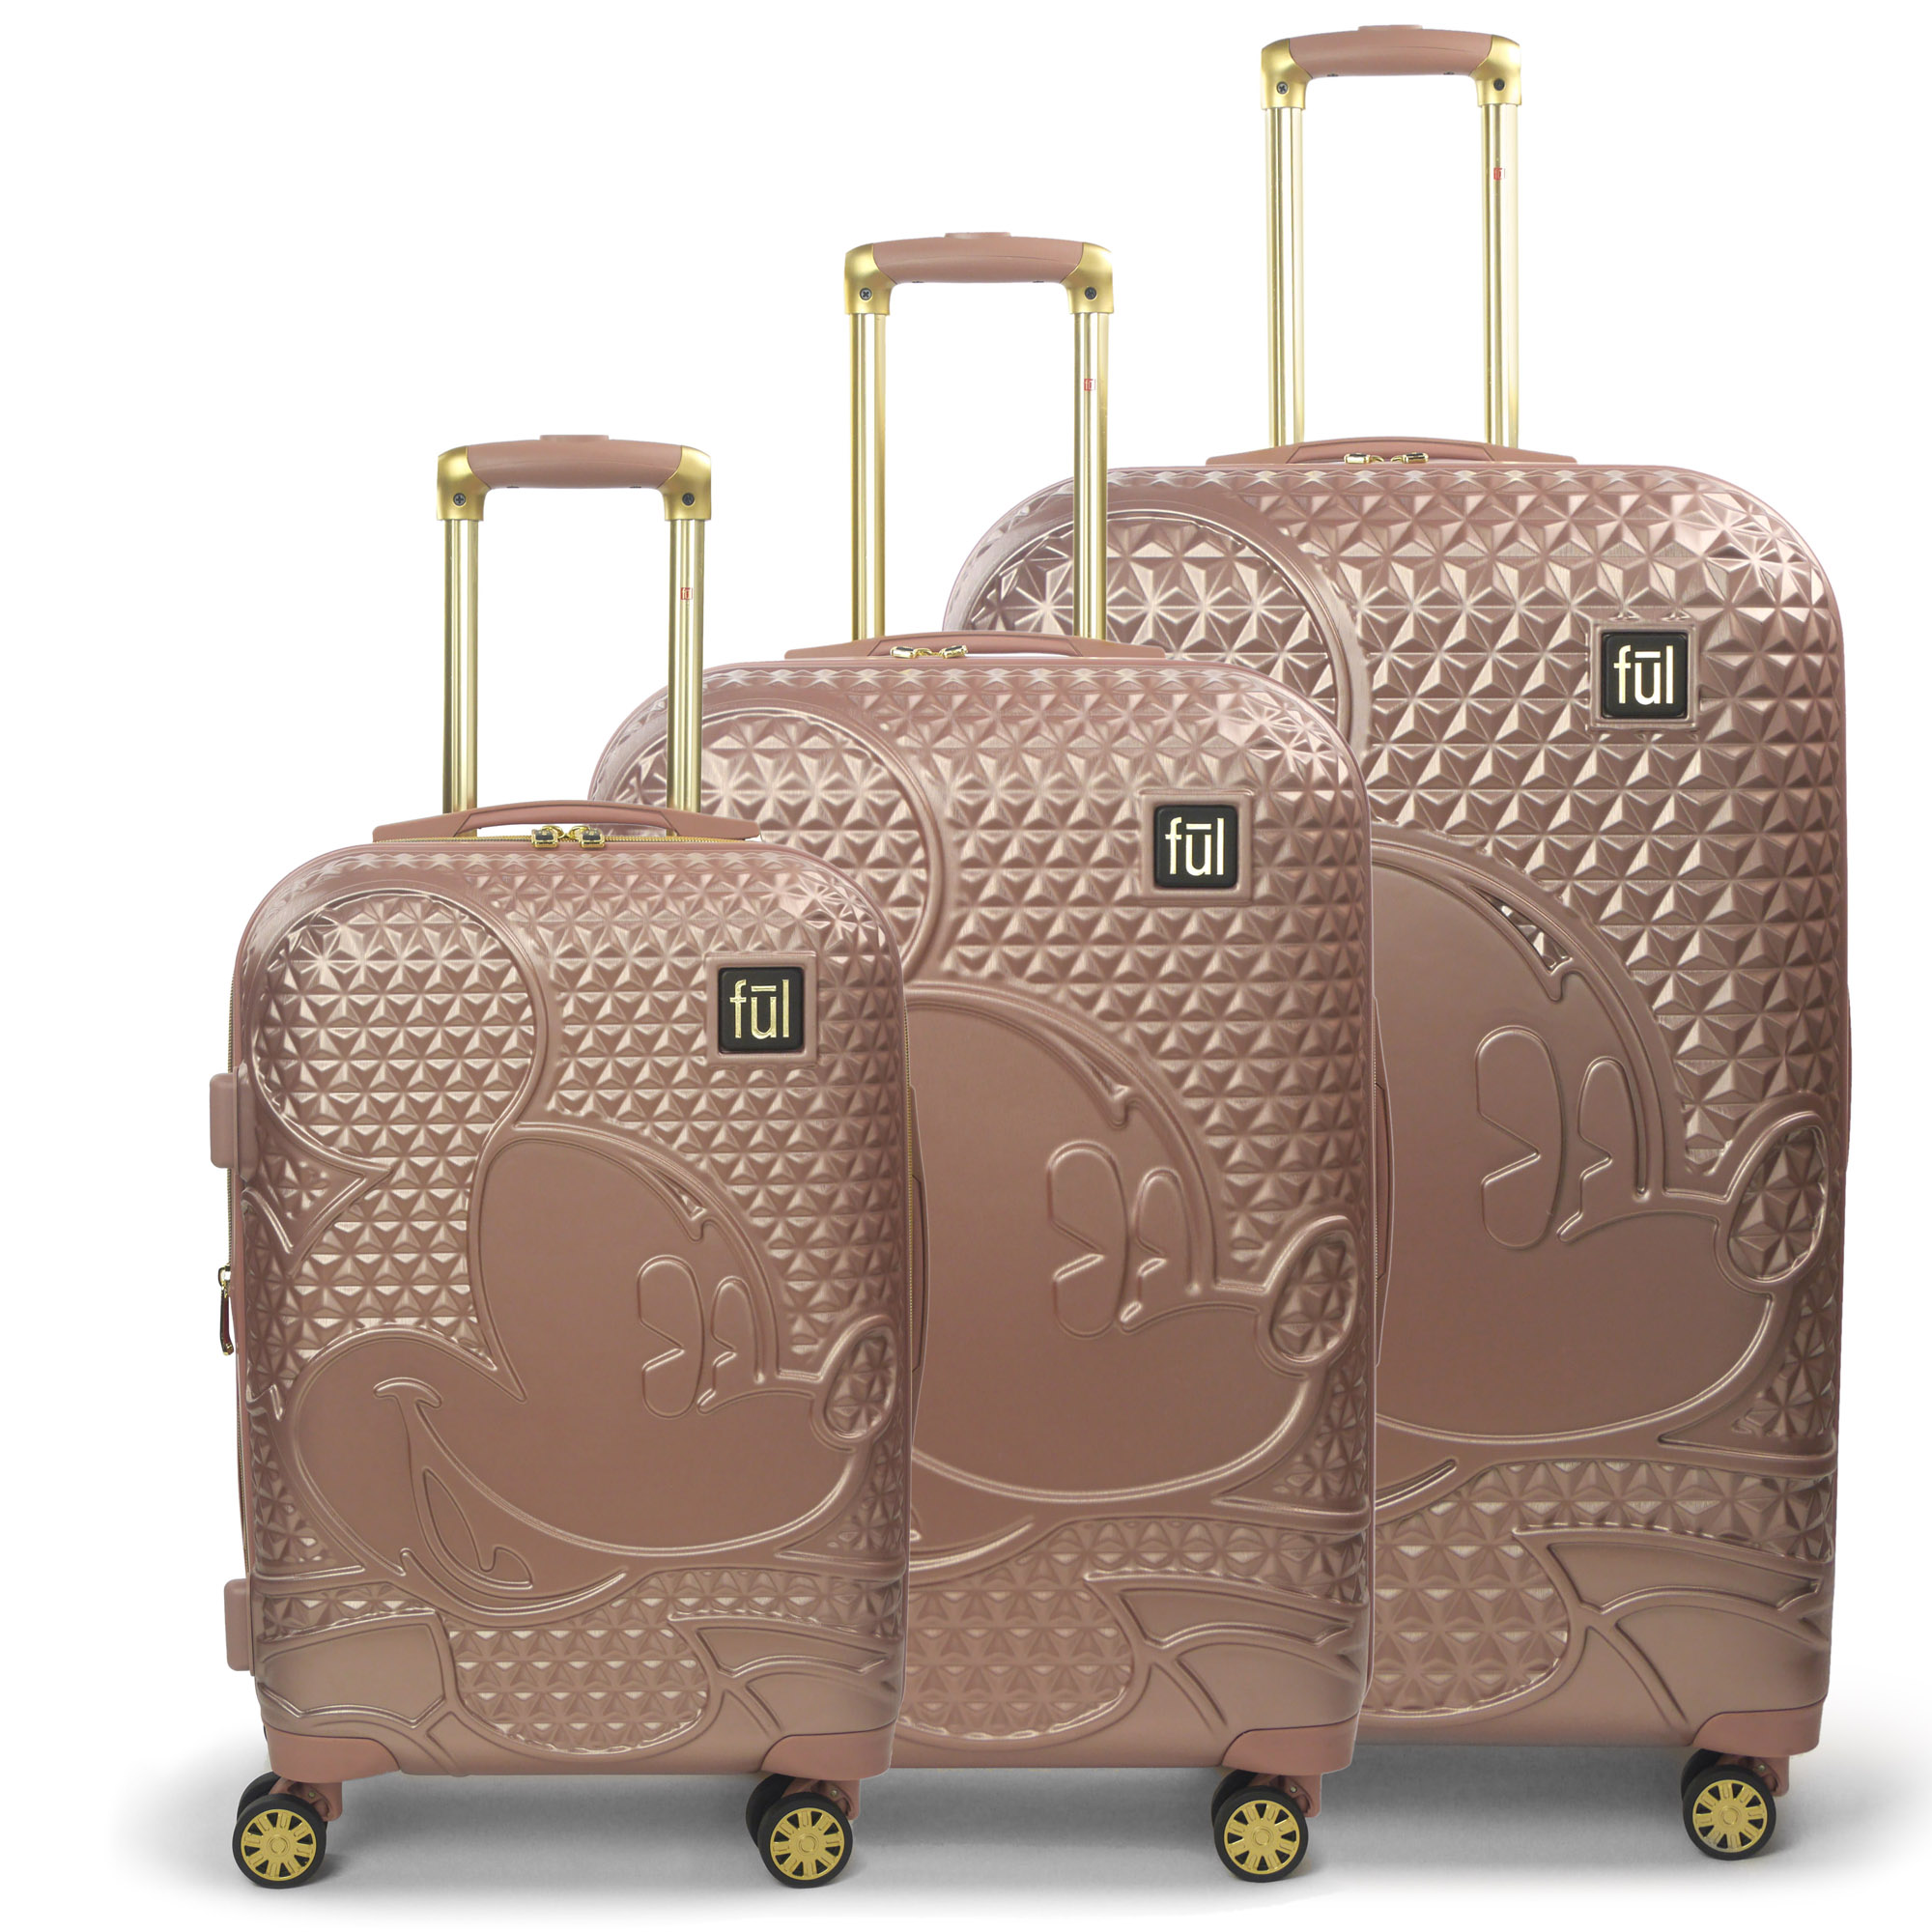 FUL Disney Textured Mickey Mouse Hard Sided 3 Piece Luggage Set, Rose Gold, 29", 25", and 21" Suitcases - image 1 of 11